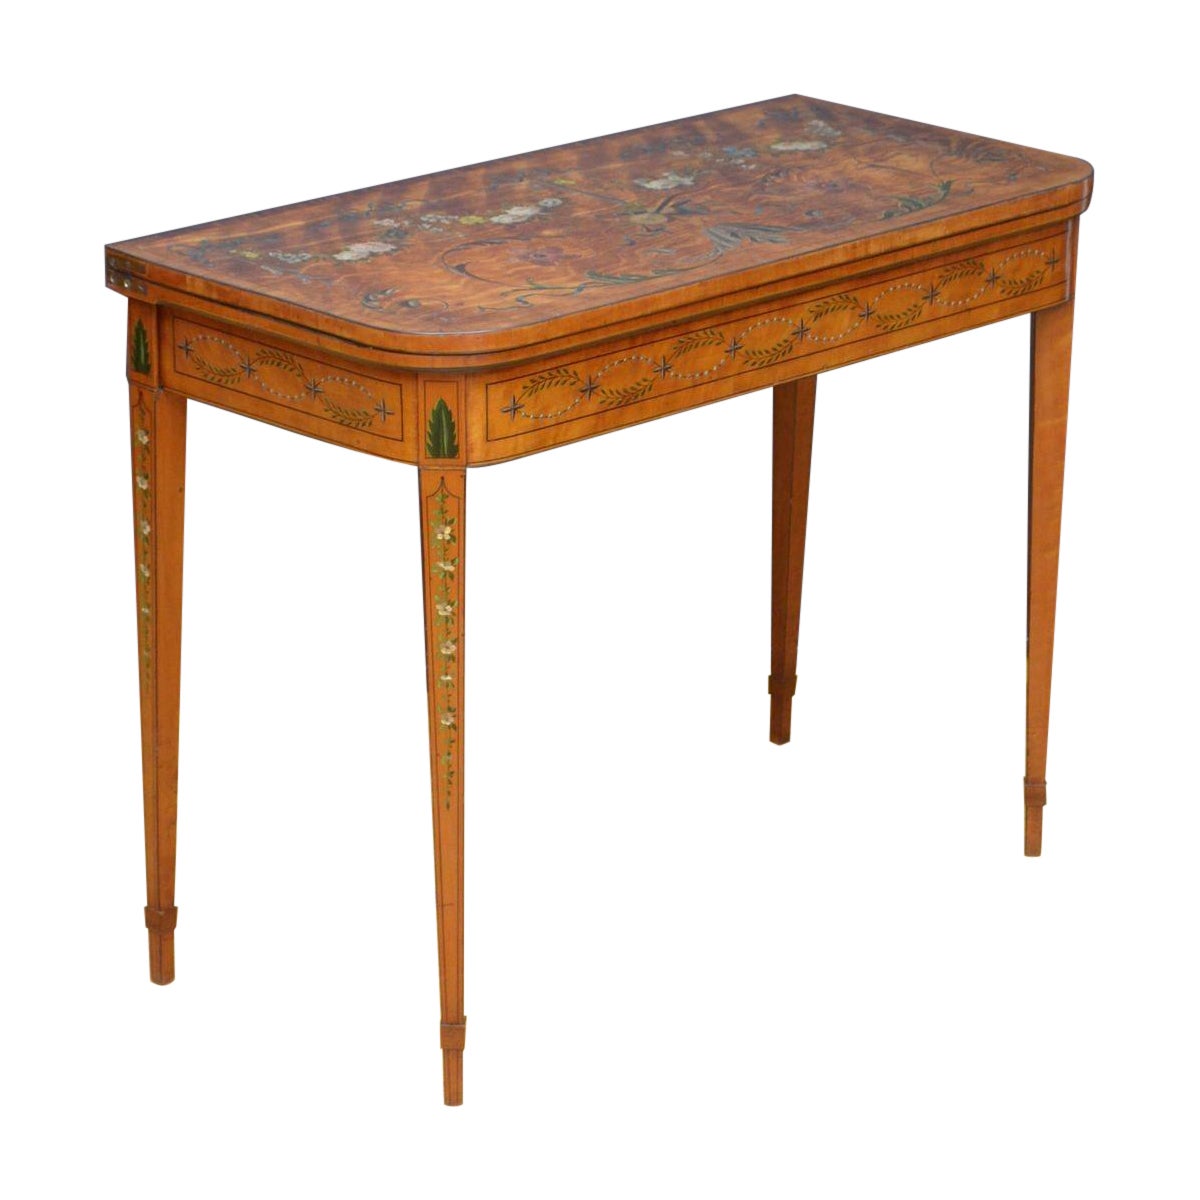 Sheraton Perion Painted Card Table in Satinwood